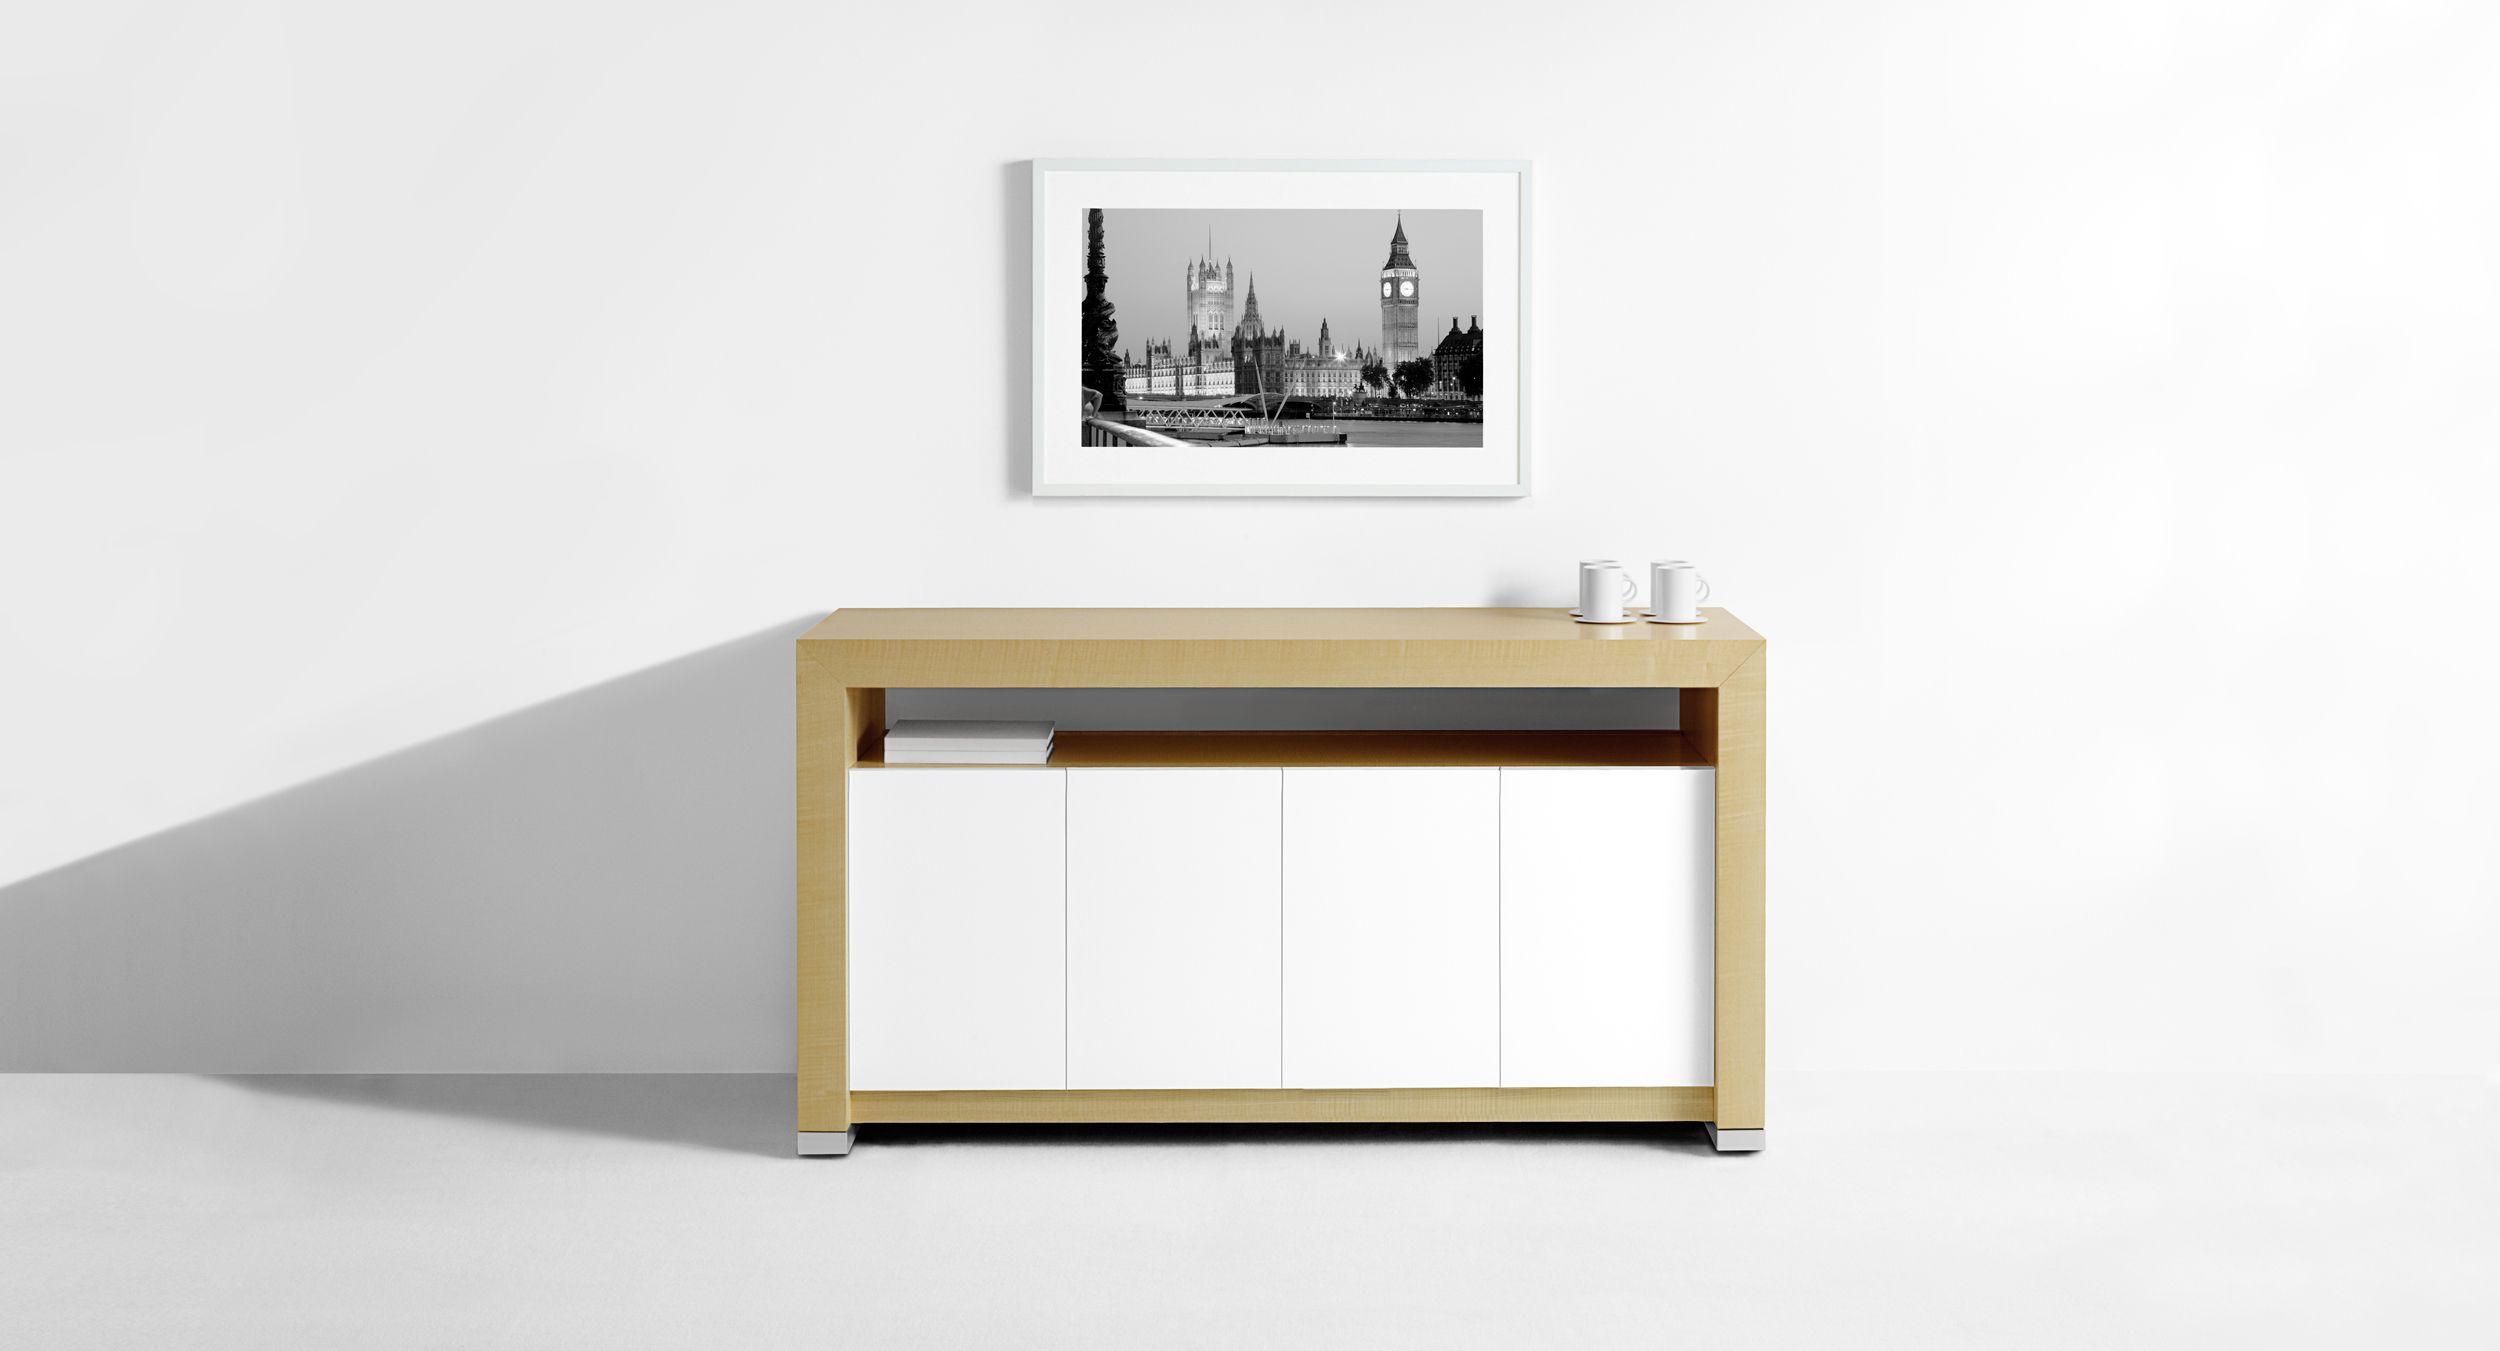 Motus Serving Credenzas are mobile and feature door access from the front and back.